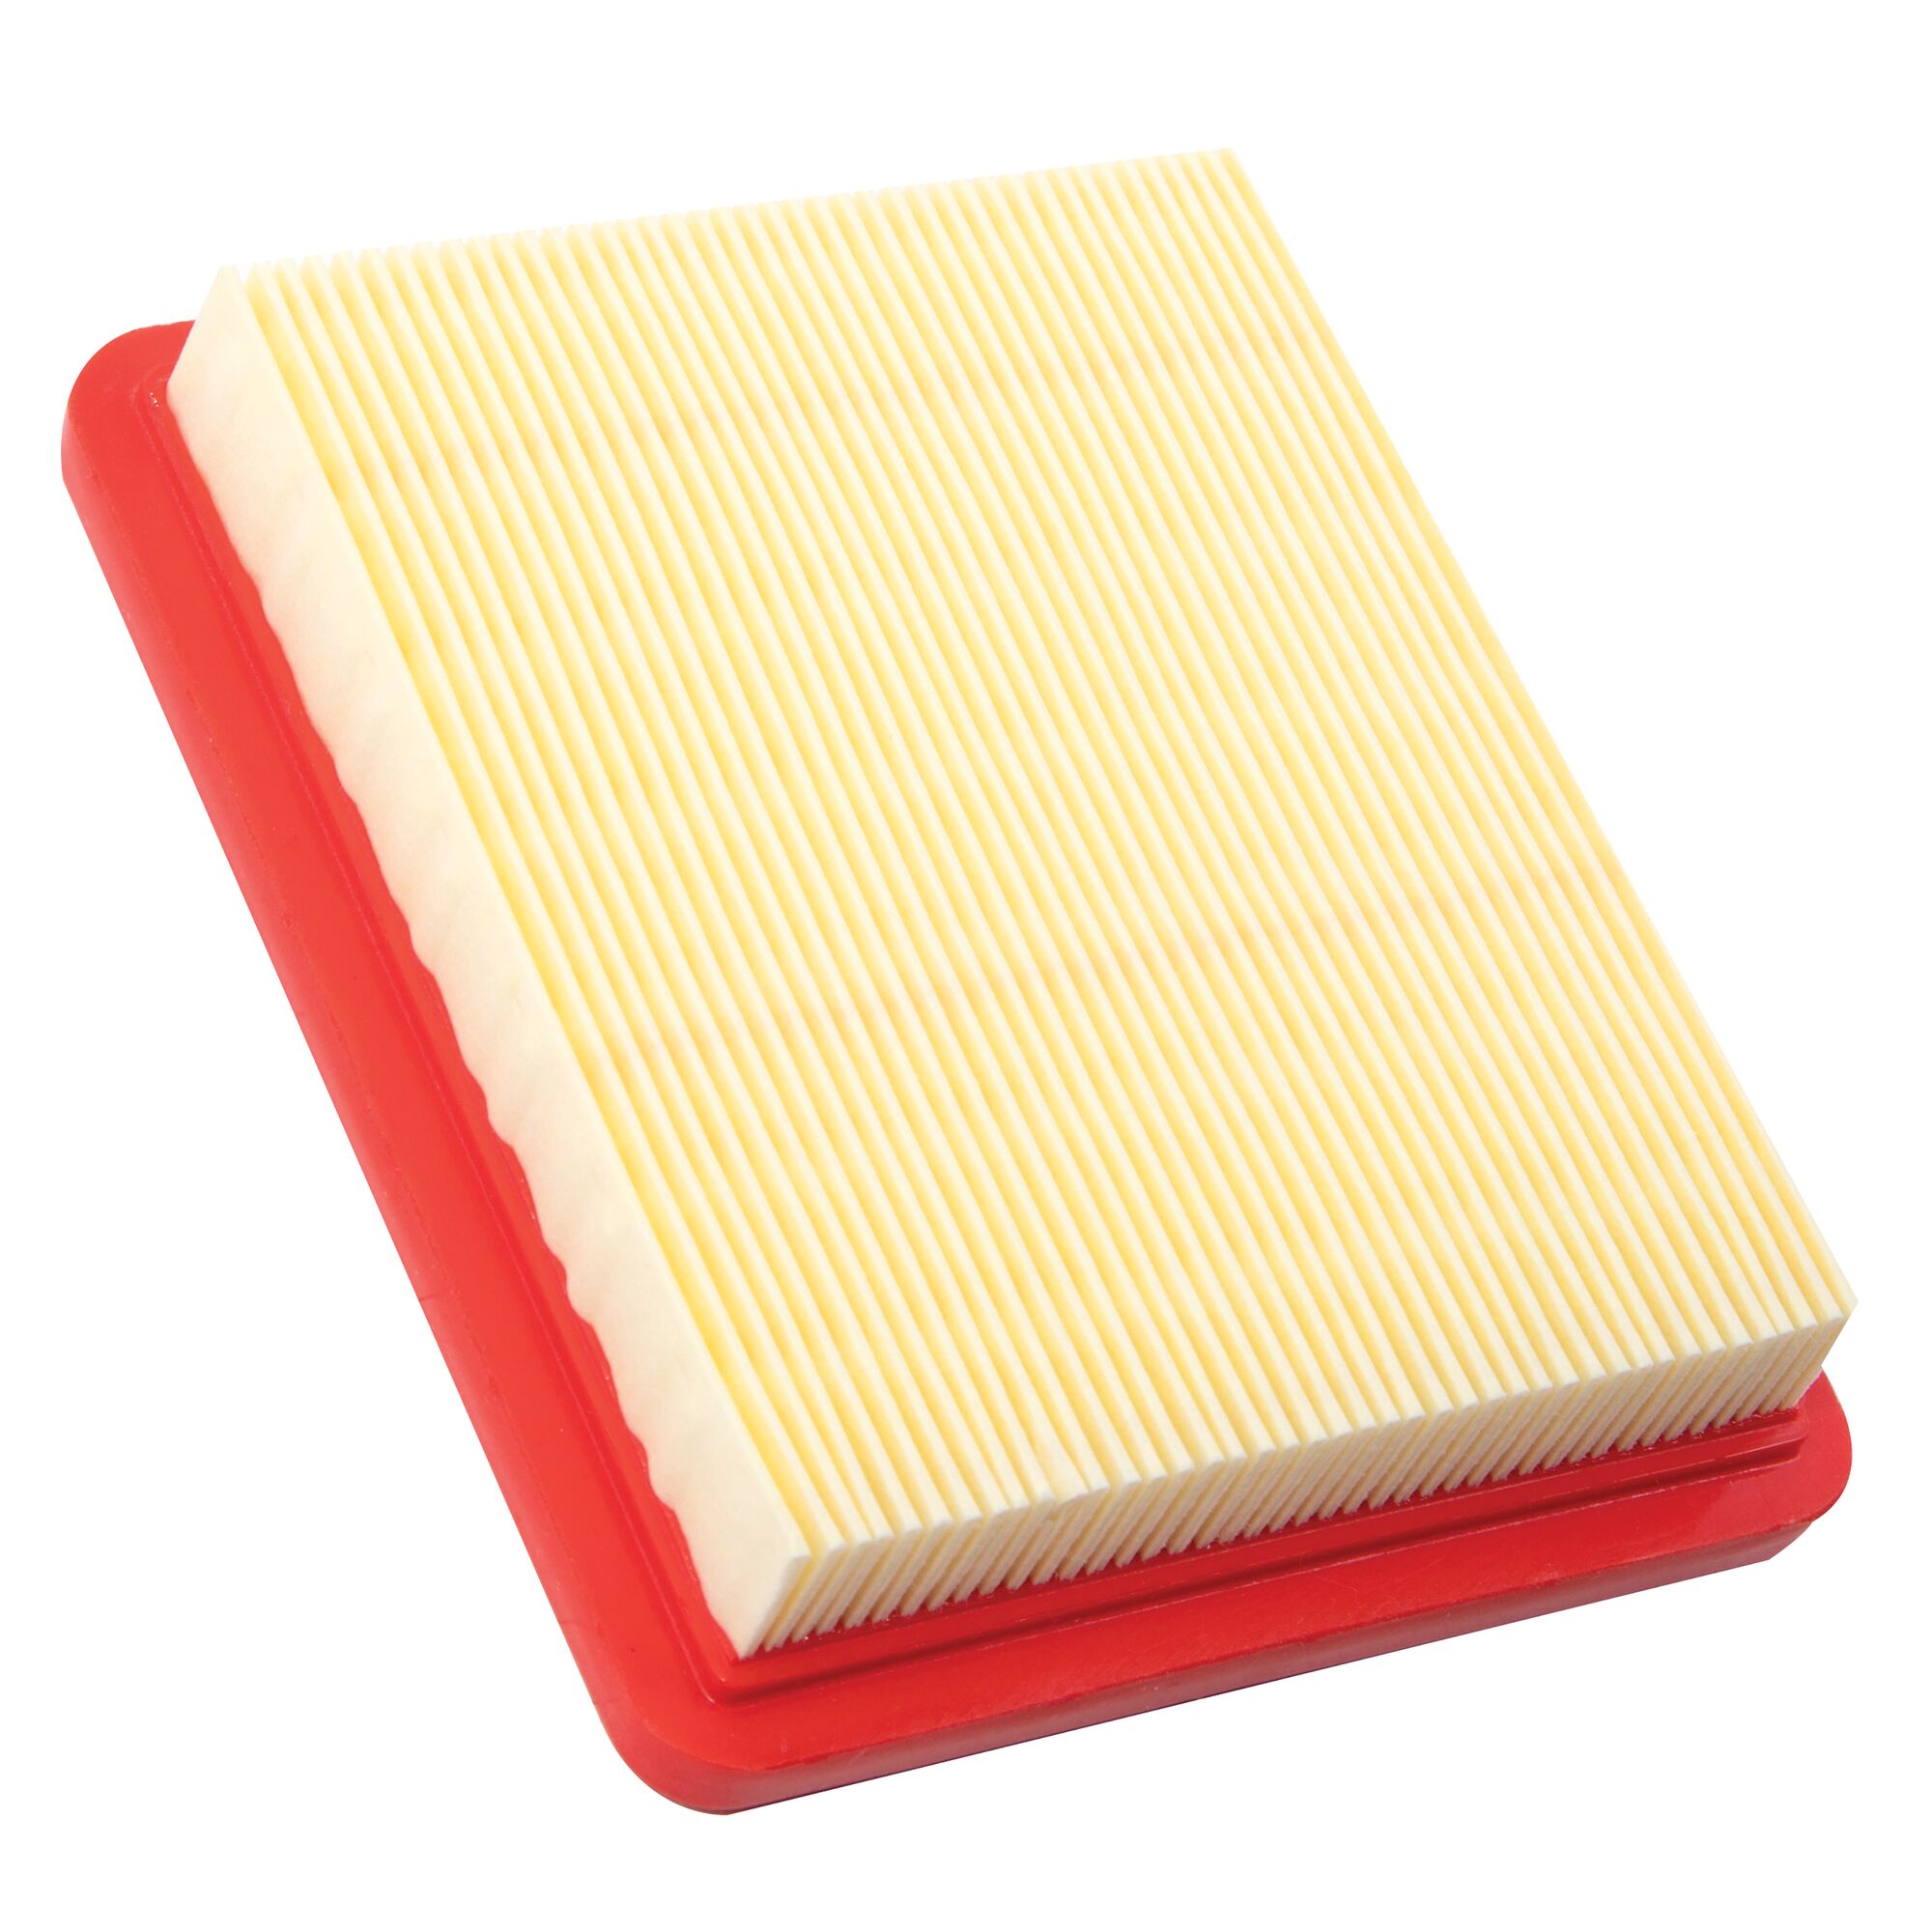 Right profile of air filter.